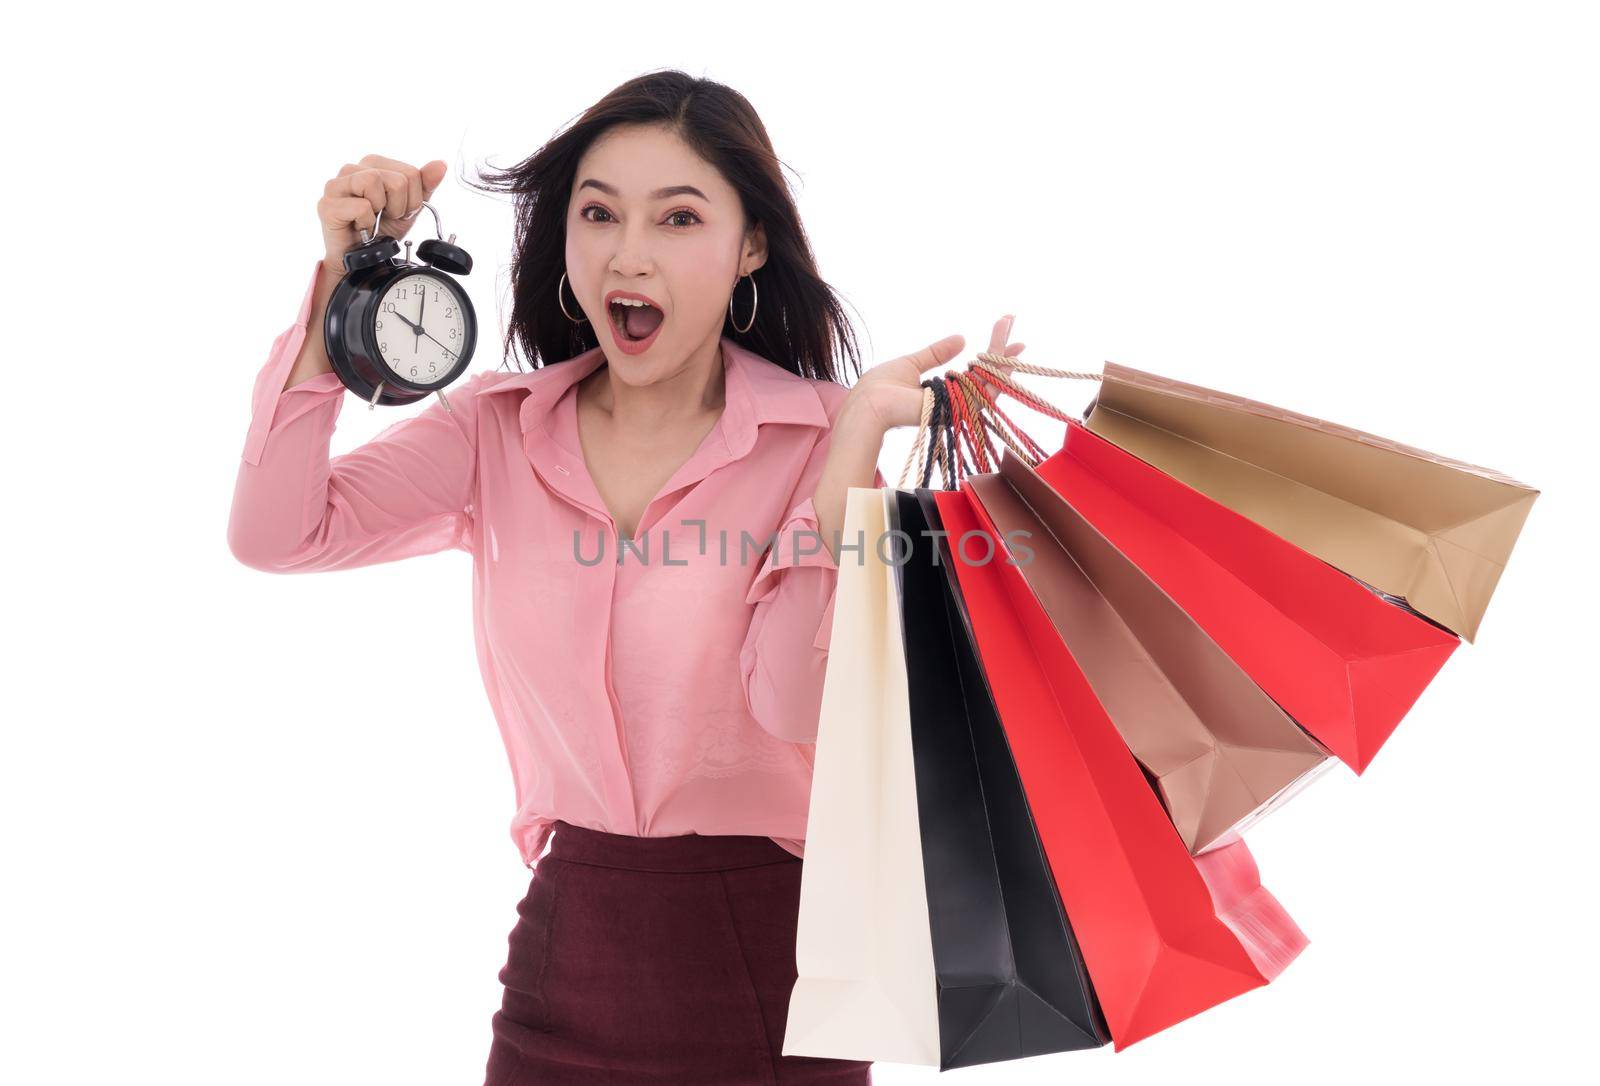 happy woman holding shopping bag and clock isolate on a white background